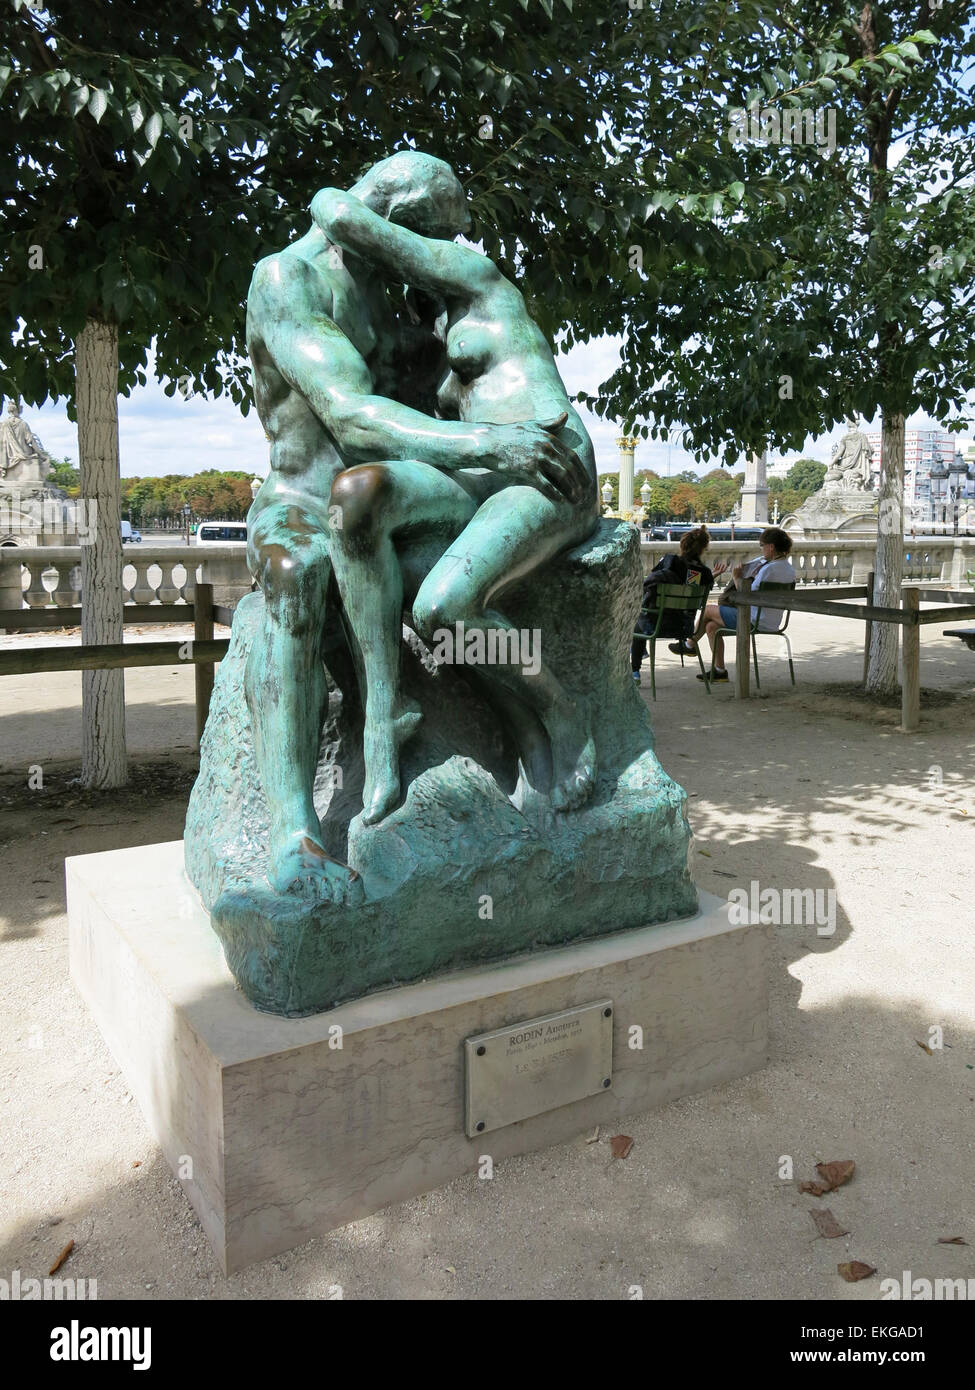 The Kiss. A Rodin sculpture of bronze in Paris, France. Stock Photo